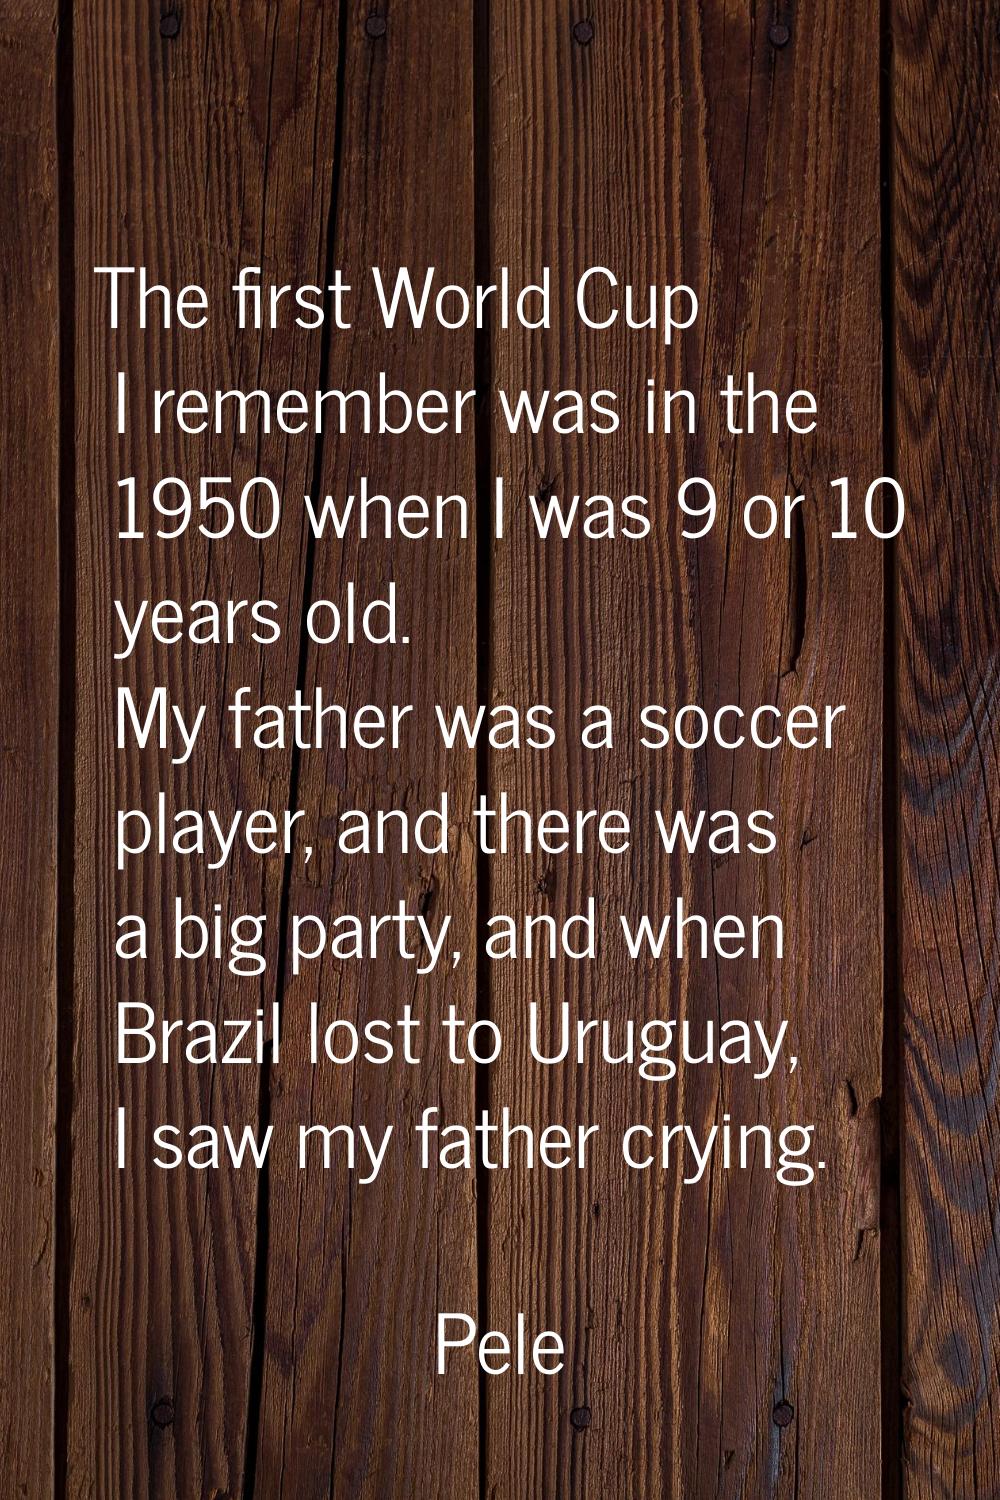 The first World Cup I remember was in the 1950 when I was 9 or 10 years old. My father was a soccer